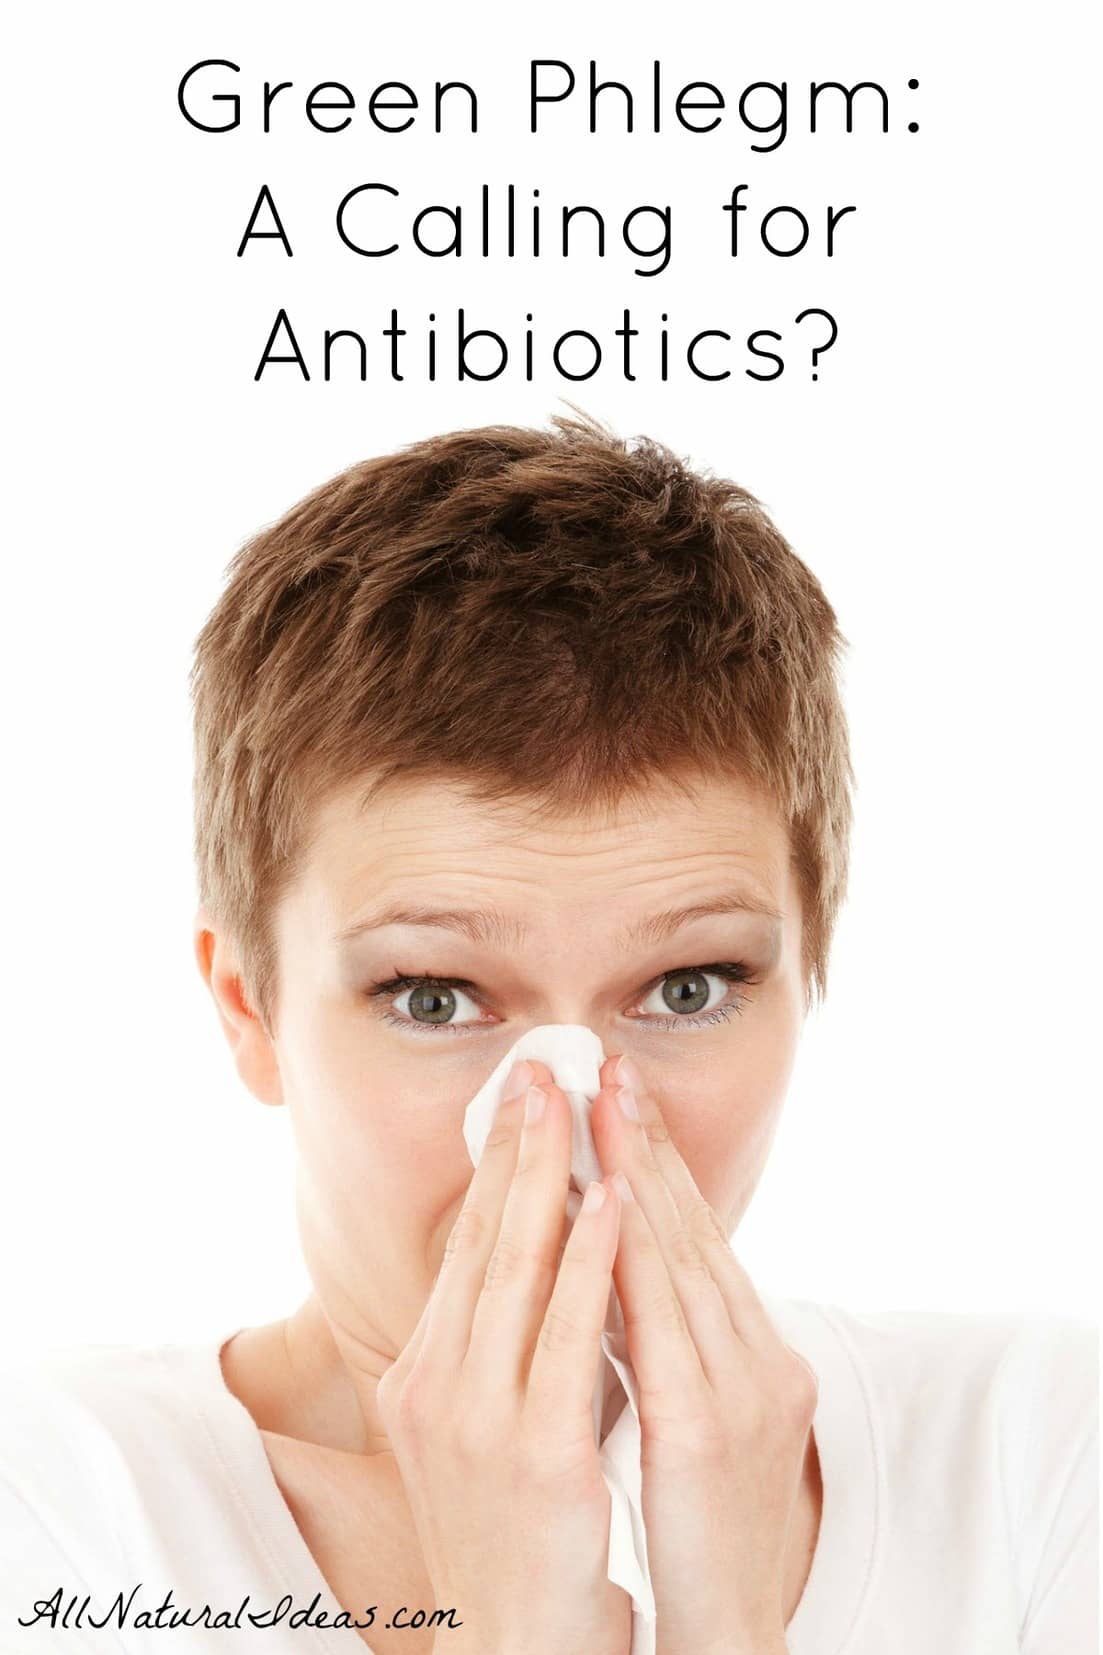 When cold and flu season is in full swing, we are often coughing or blowing green phlegm out of our sinuses. However, does this mean we need antibiotics?